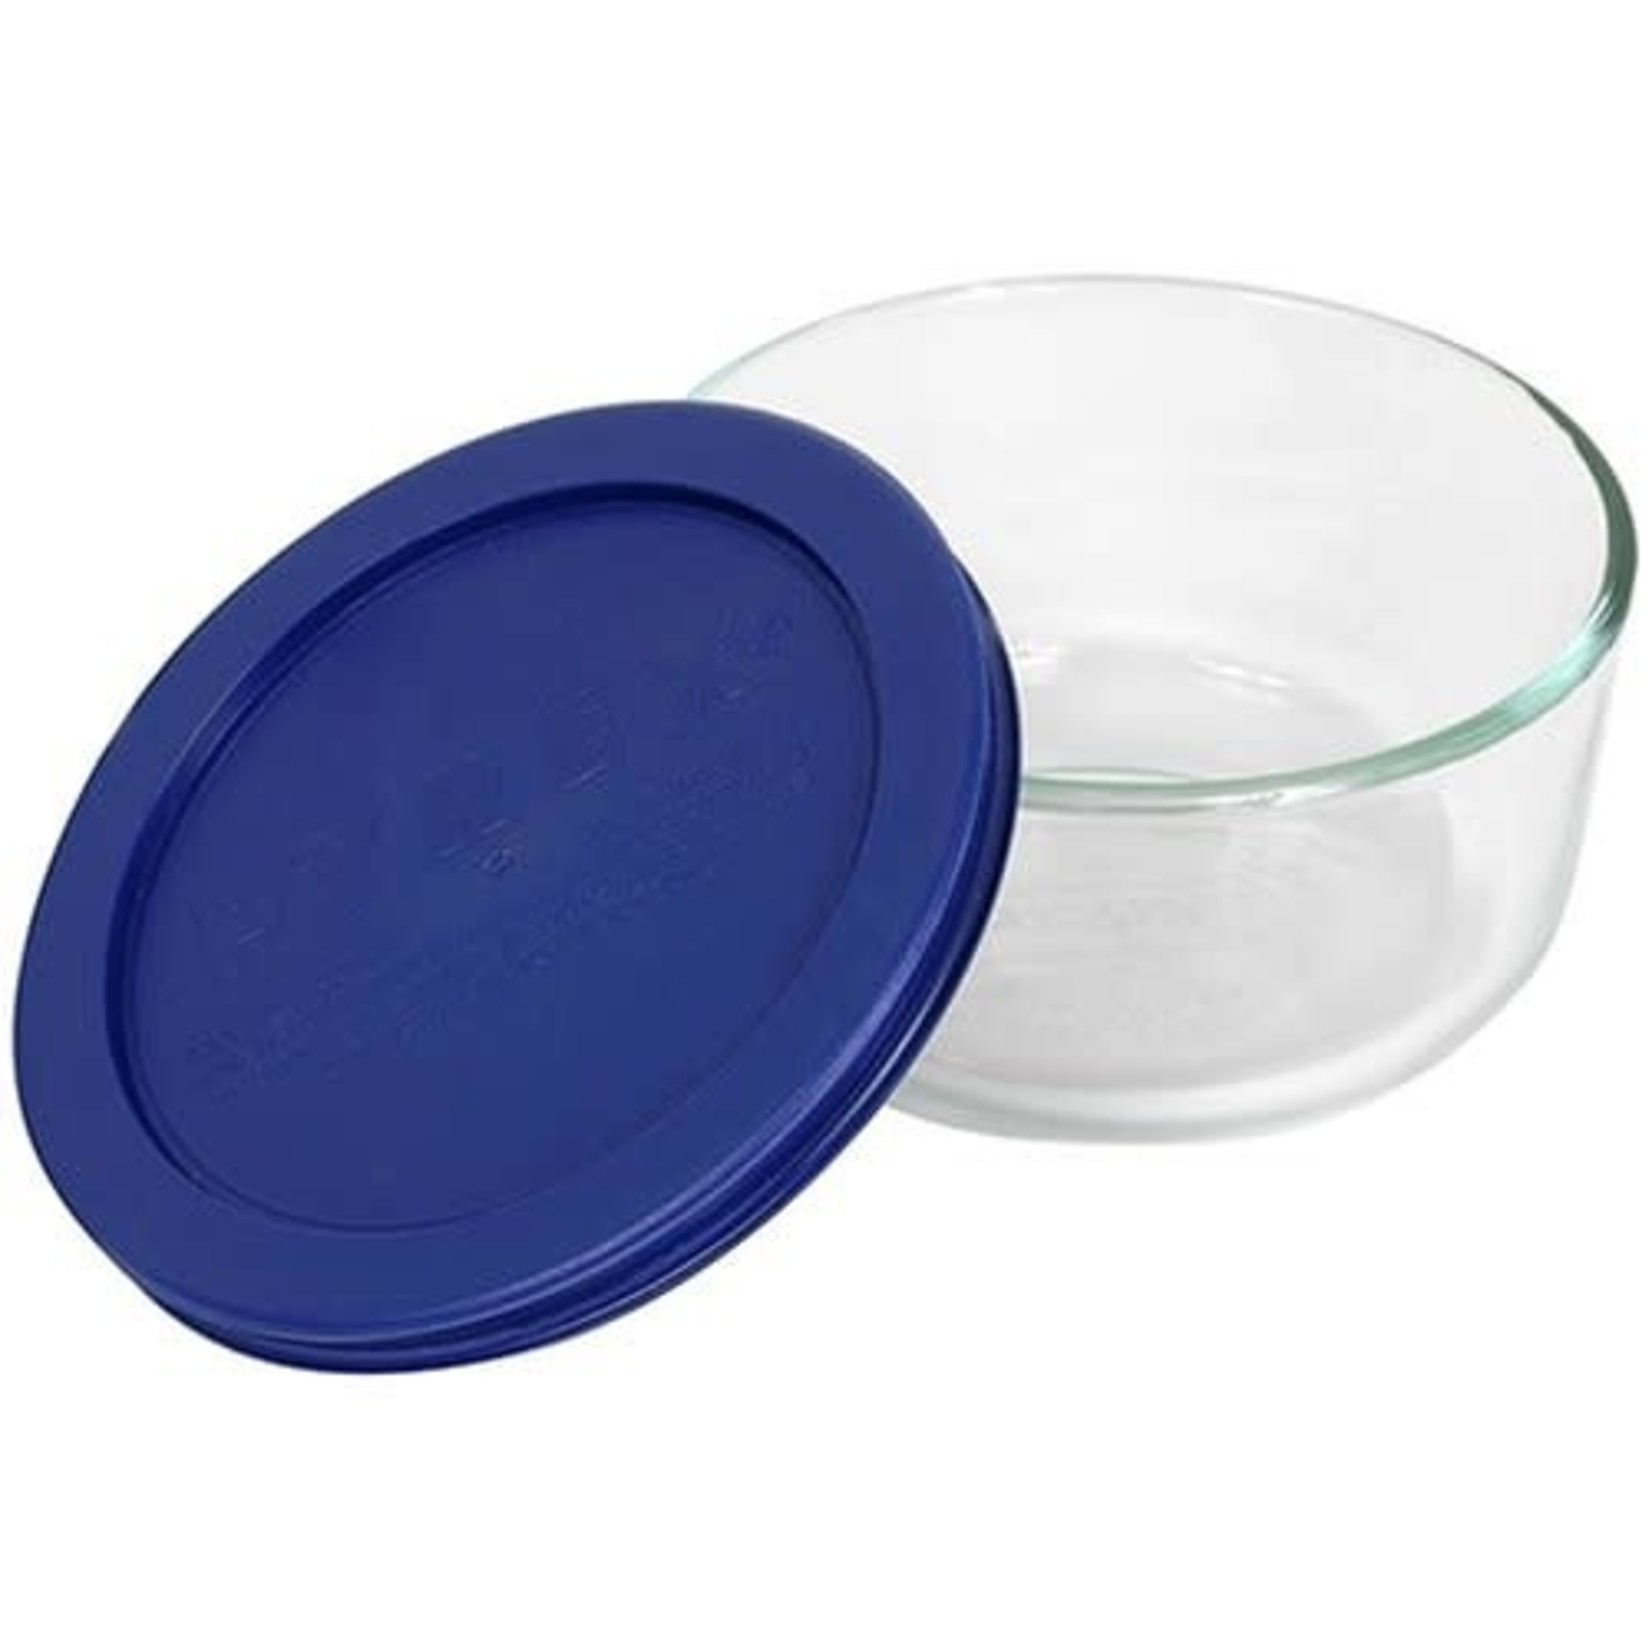 Pyrex 2 Cup Simply Storage, Glass Container, Blue, 6 Piece 